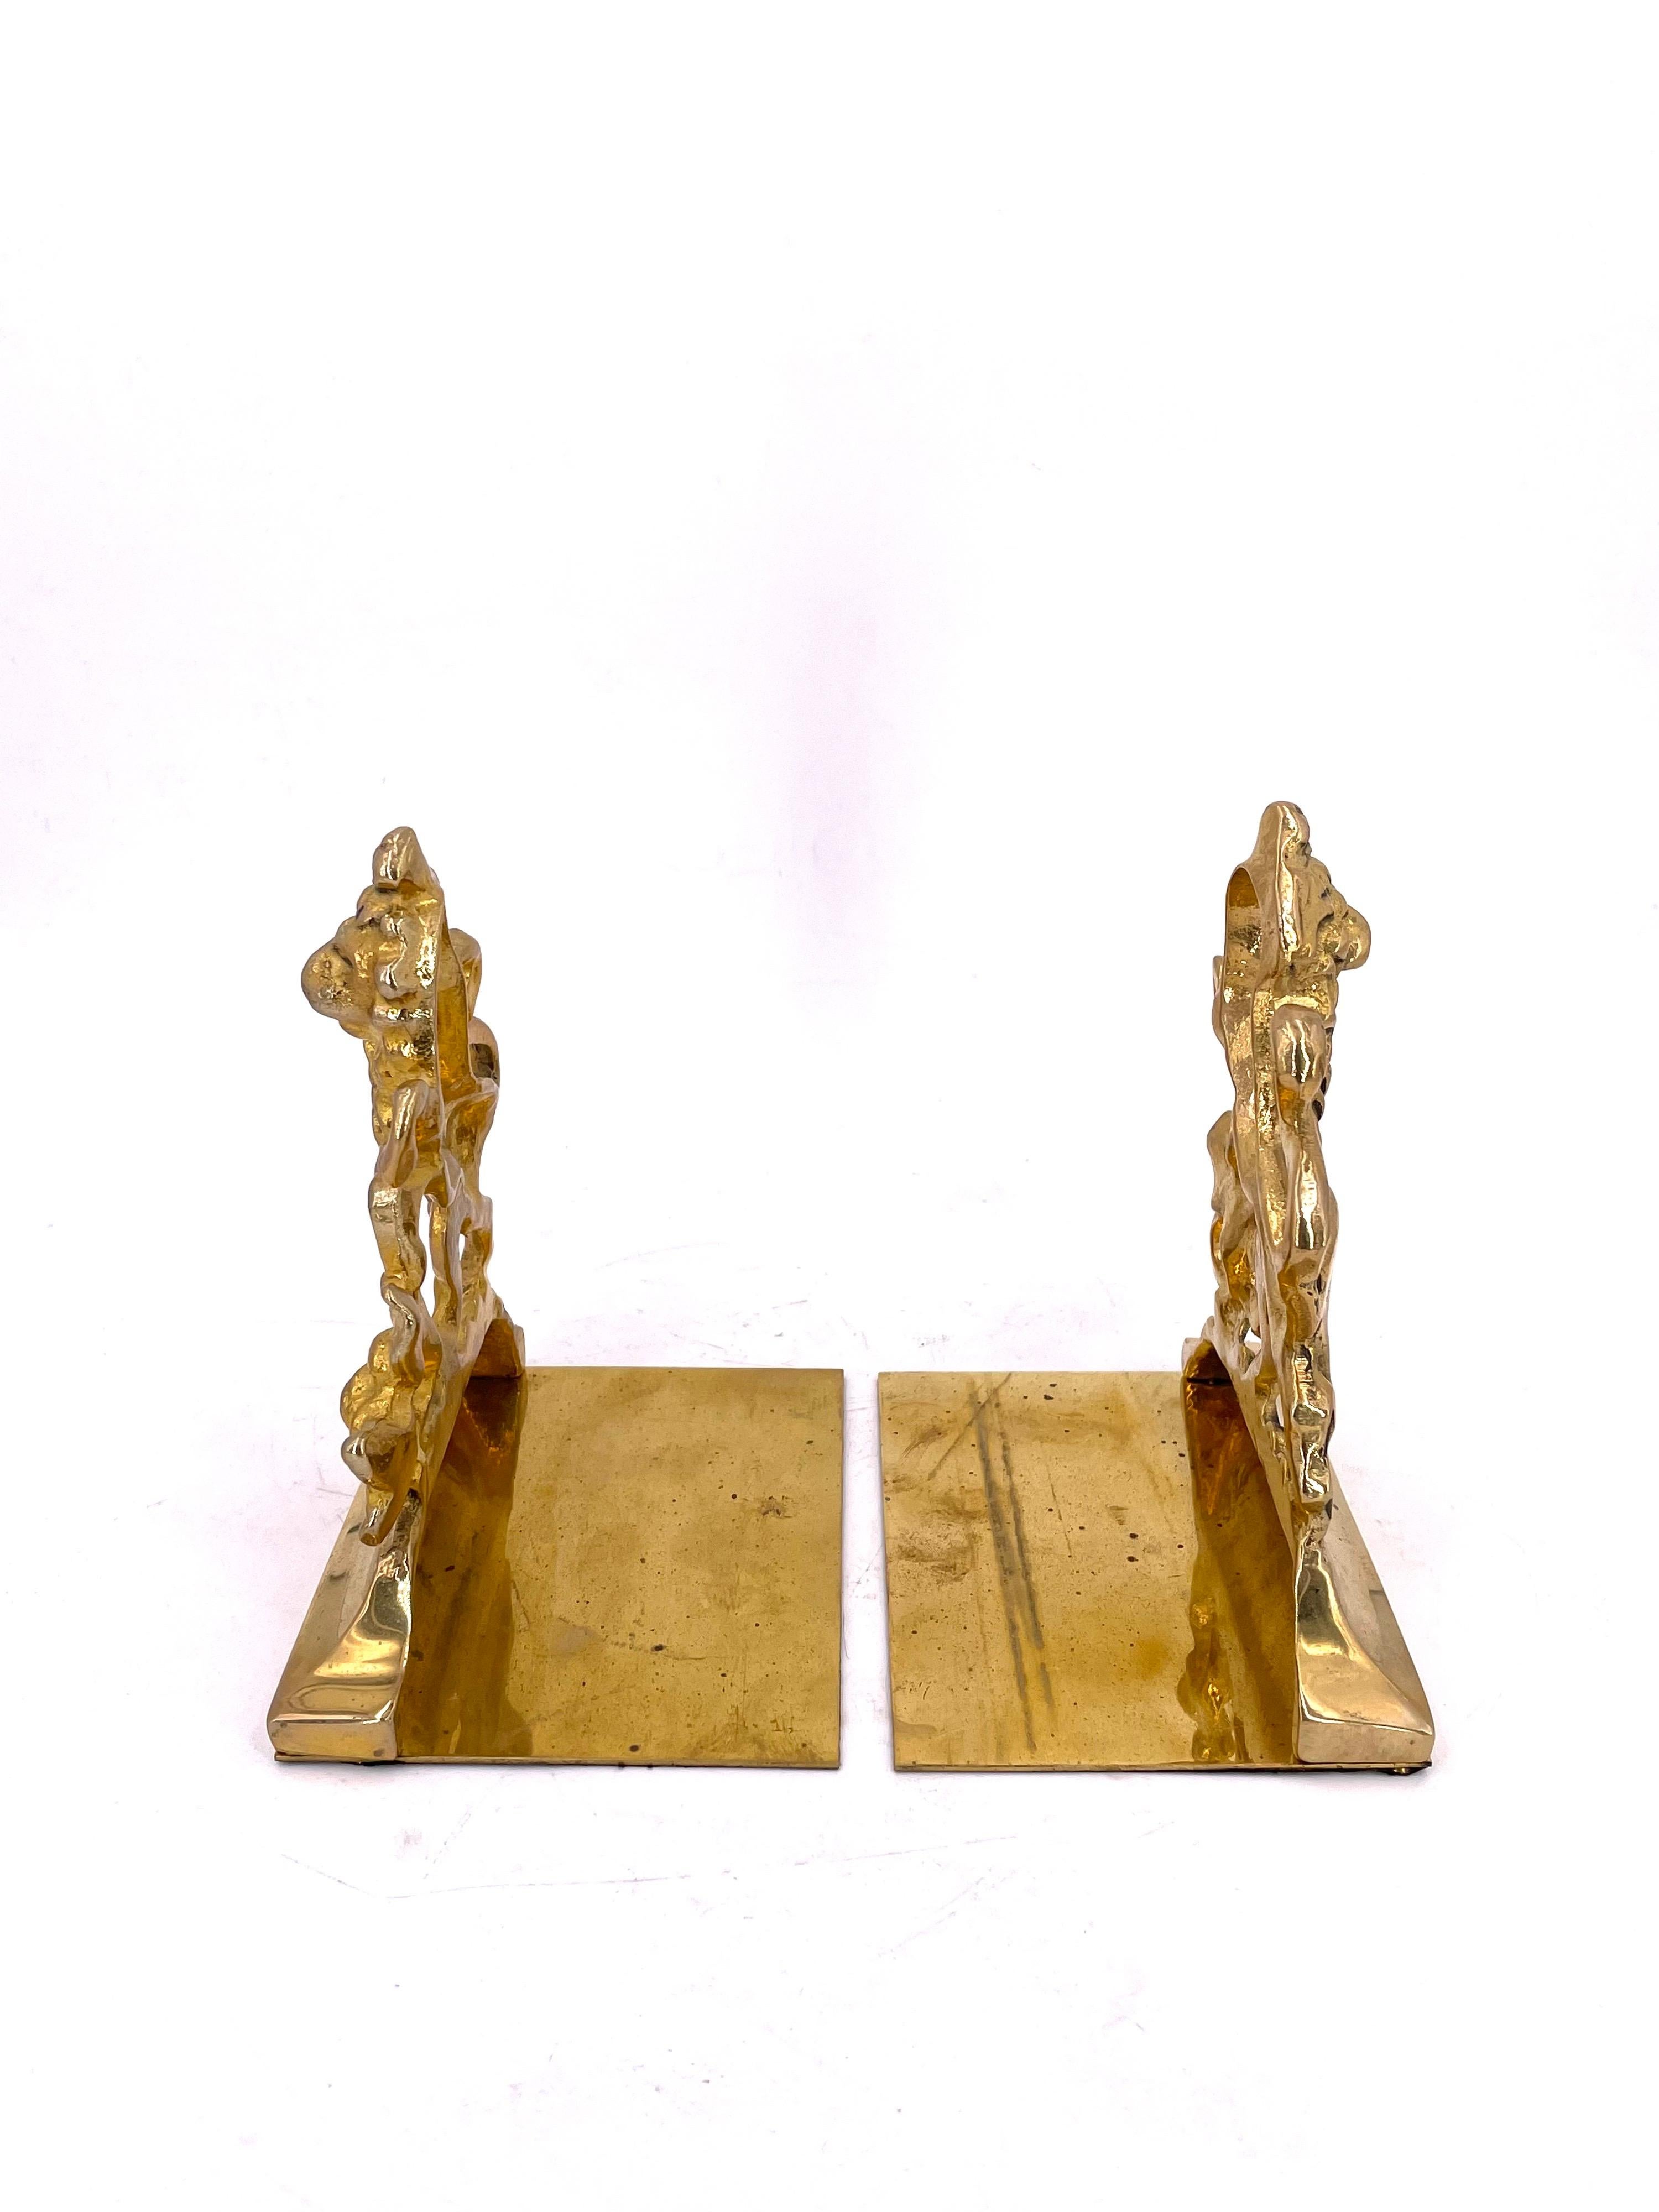 Elegant pair of solid brass English rampant lion bookends, circa 1970's.